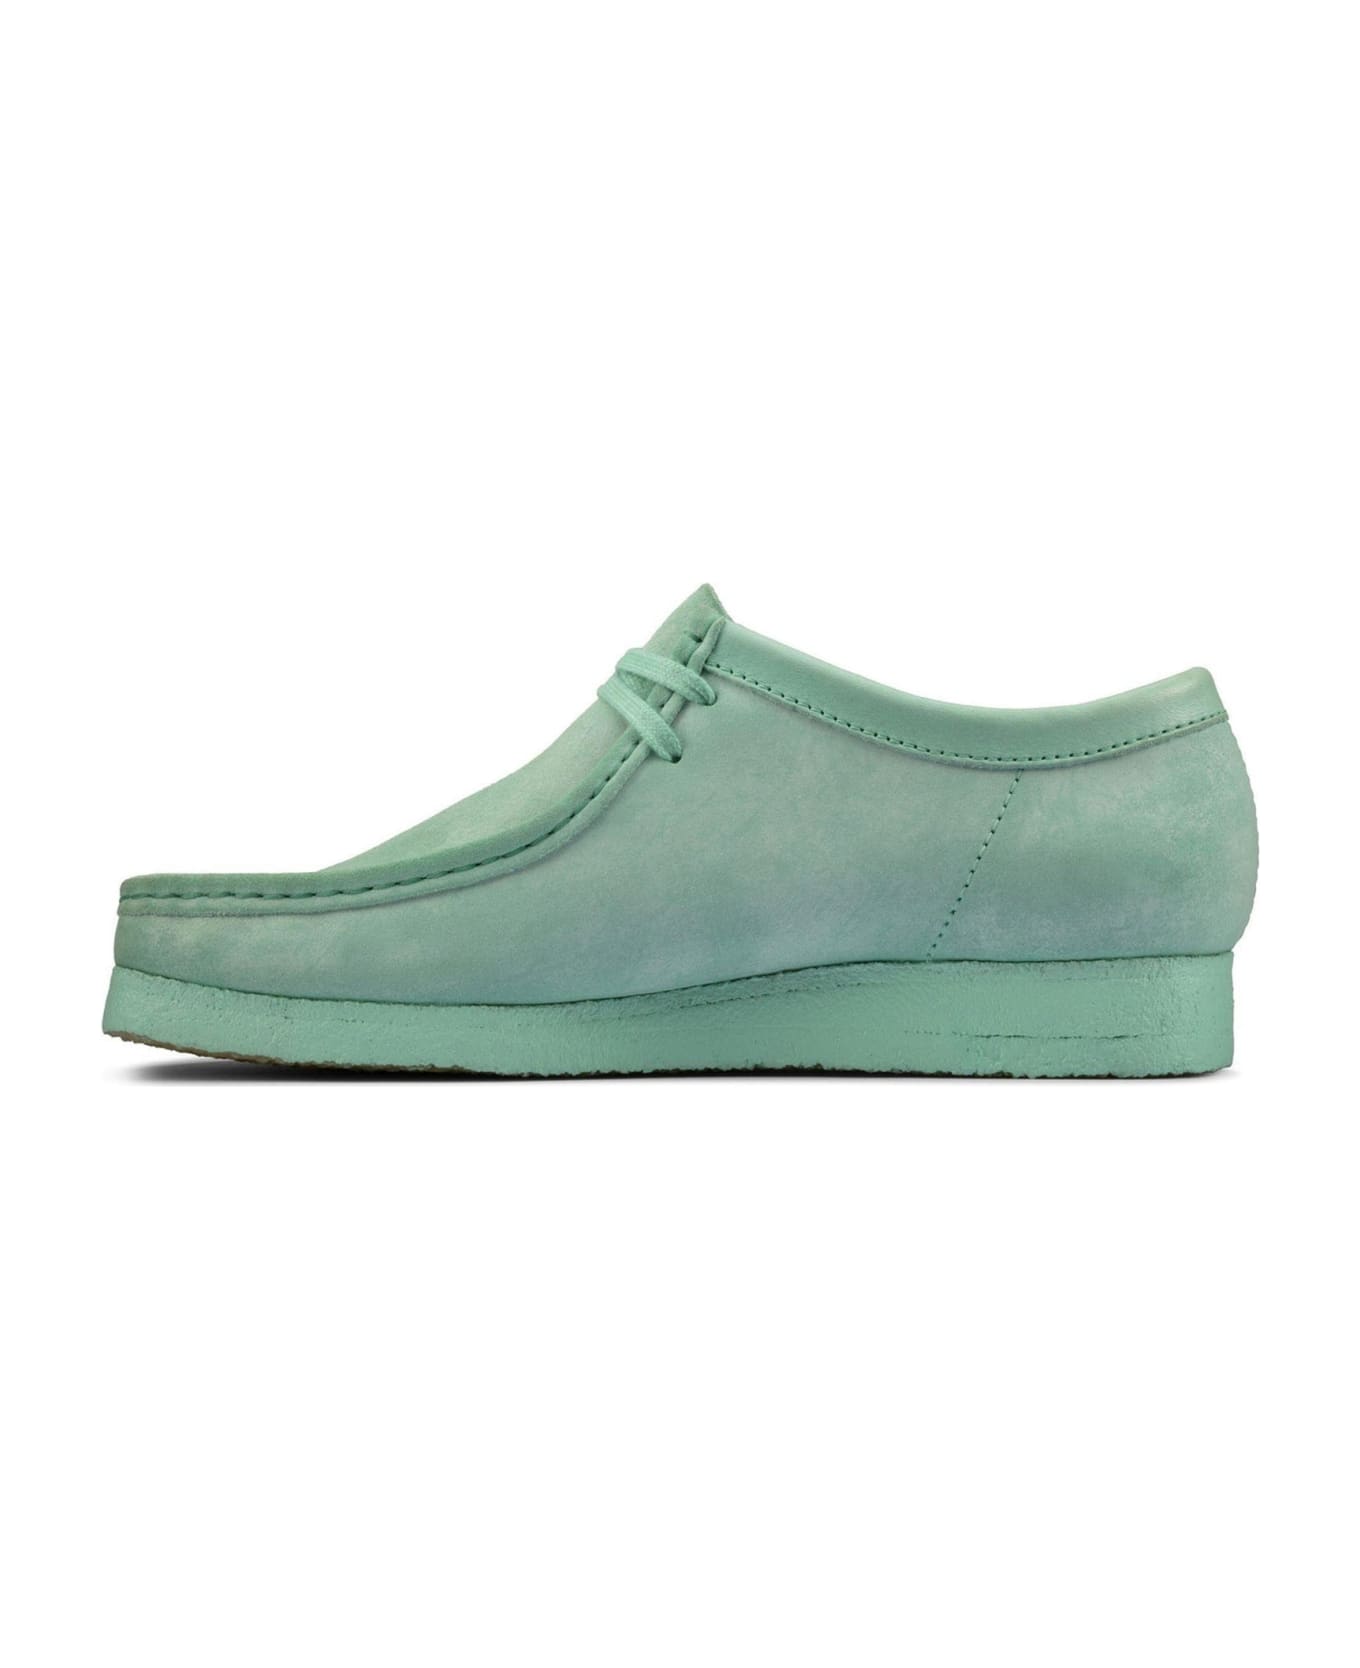 Clarks Wallabe Leather Loafers - Green フラットシューズ